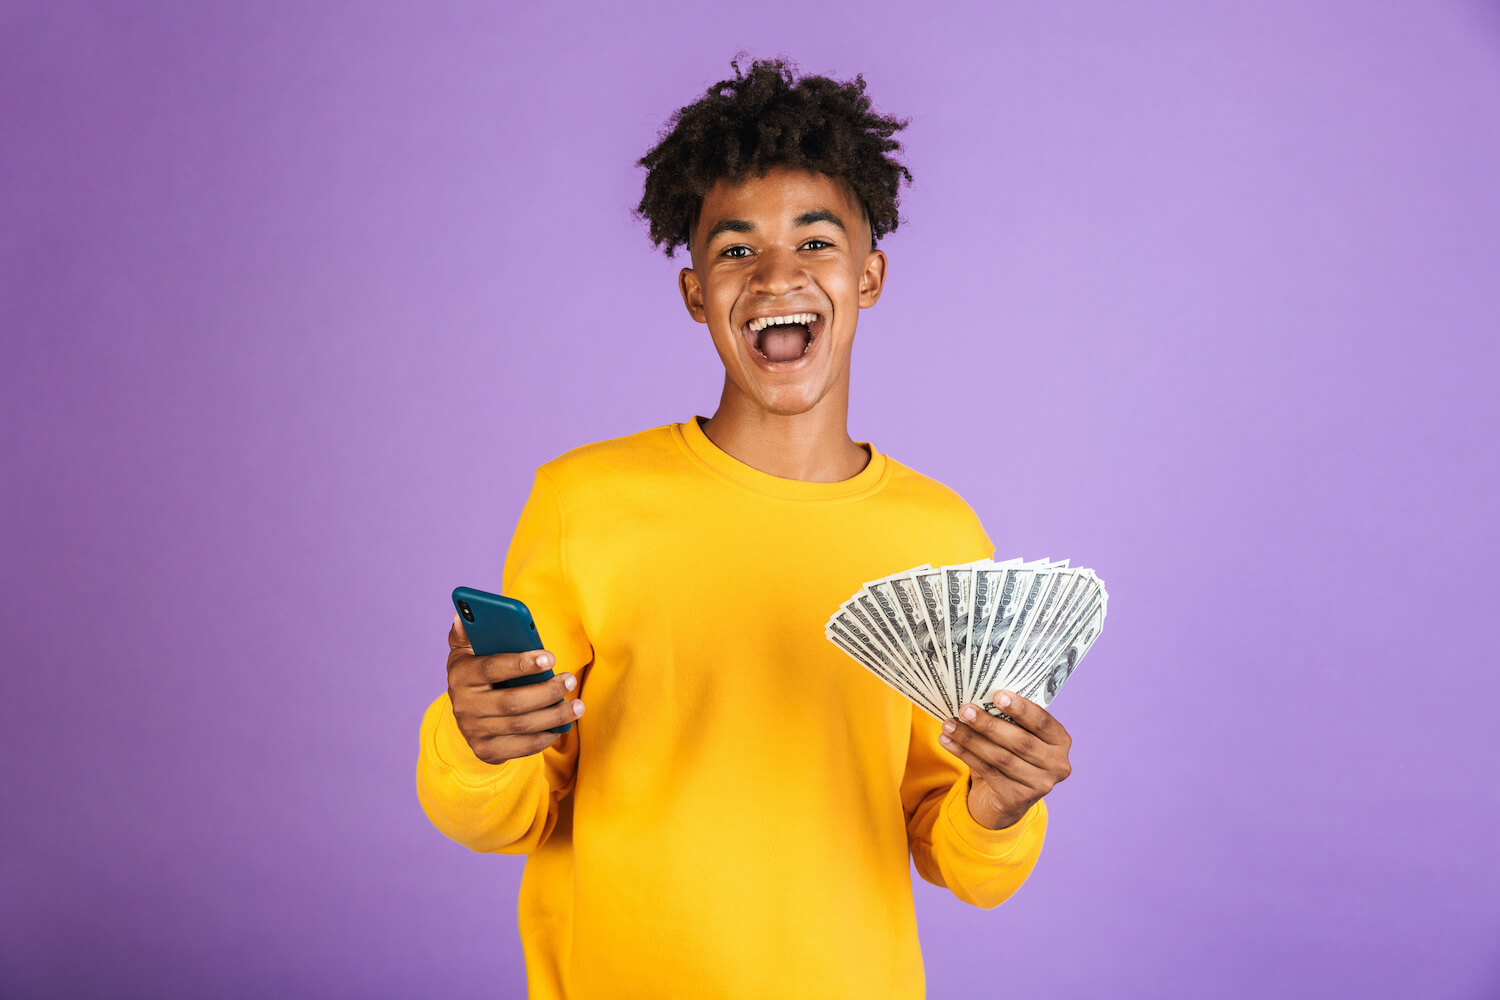 A young man holding cash and a smart phone